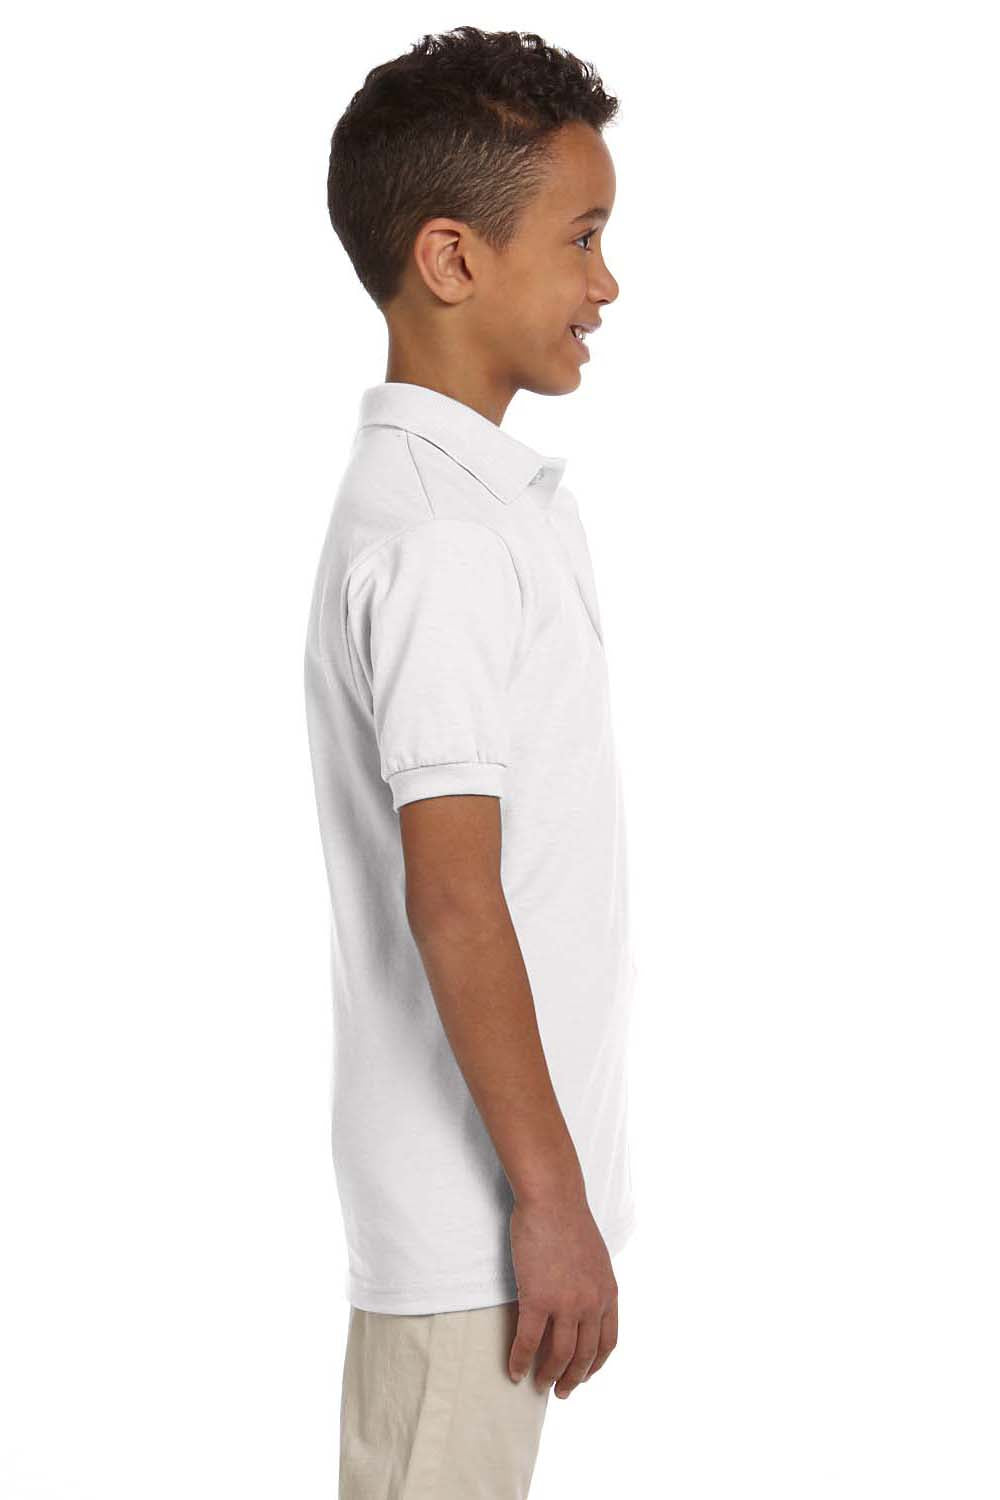 Jerzees 437Y Youth SpotShield Stain Resistant Short Sleeve Polo Shirt White Side